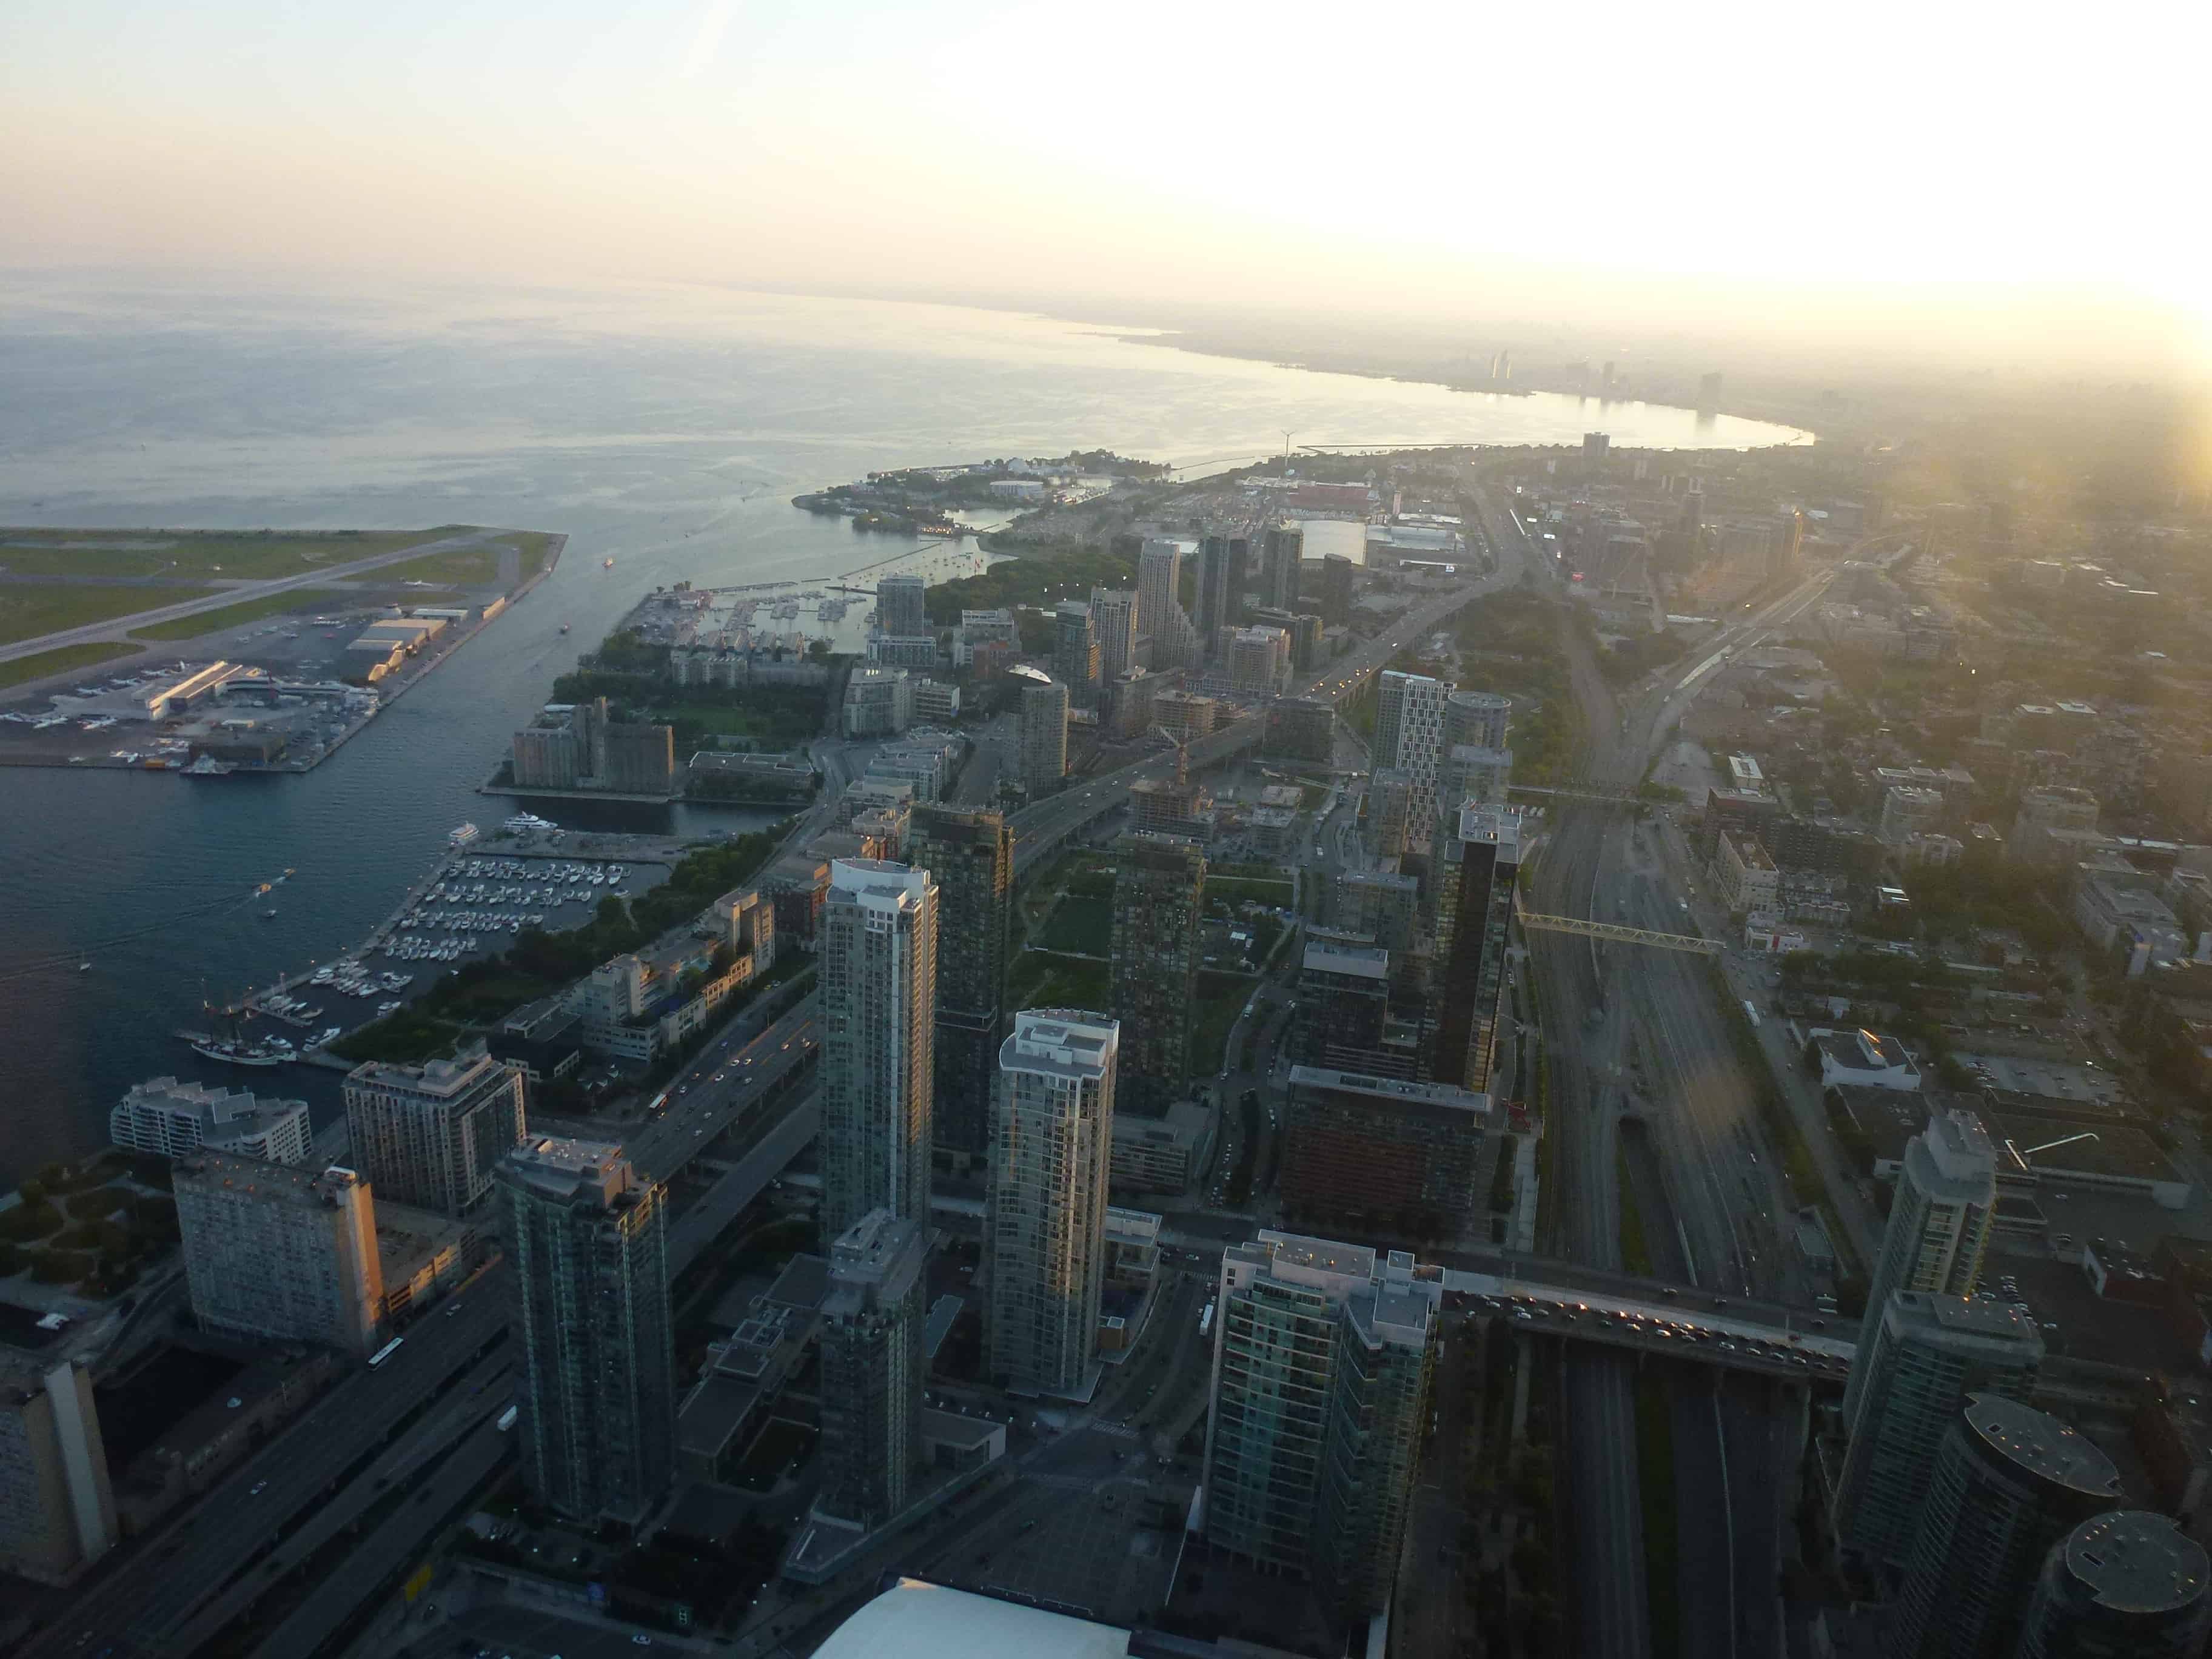 View from the main observation level at the CN Tower in Toronto, Ontario, Canada